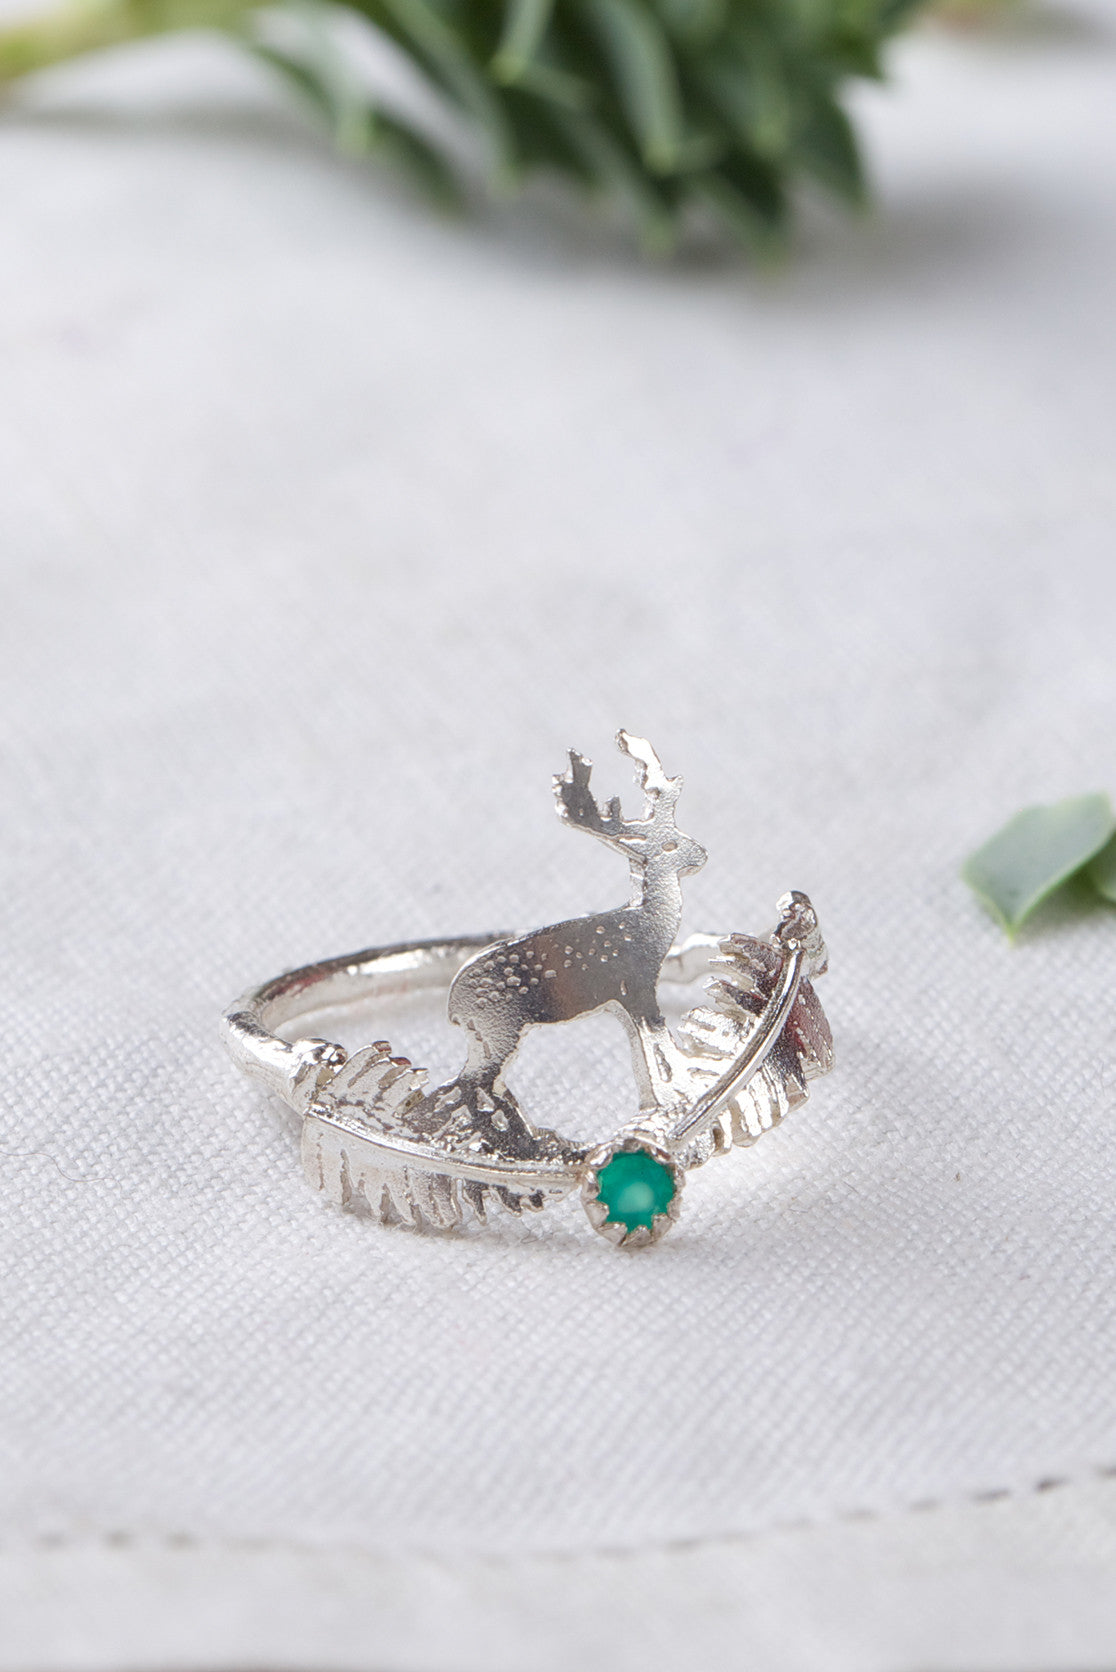 Stag and Fern Ring